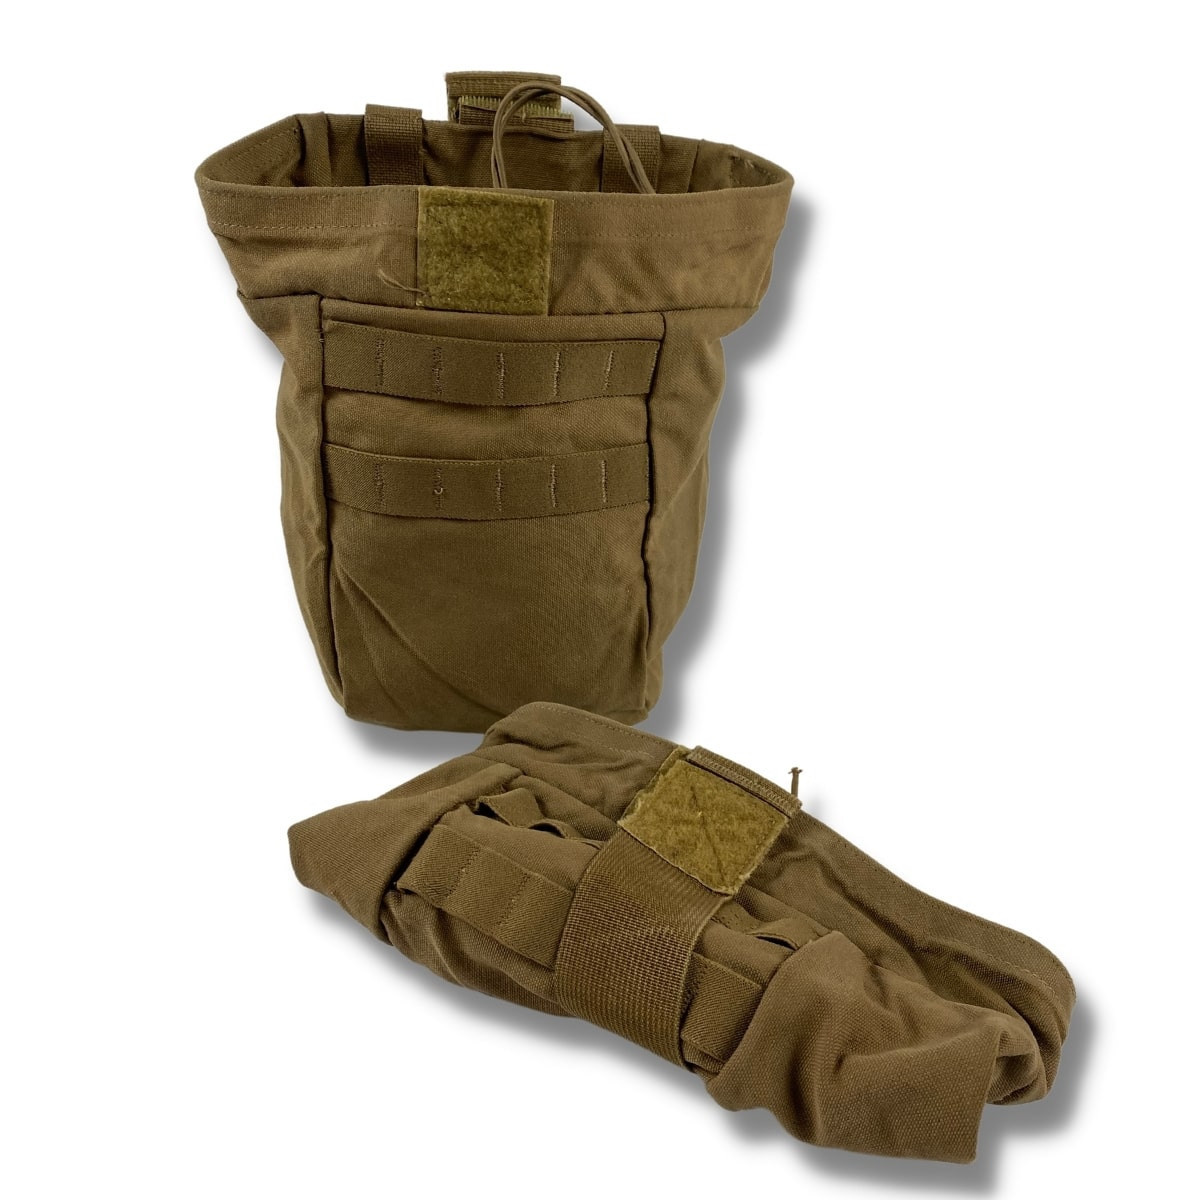 Image of USMC Issue Coyote MOLLE Dump Pouch, Used